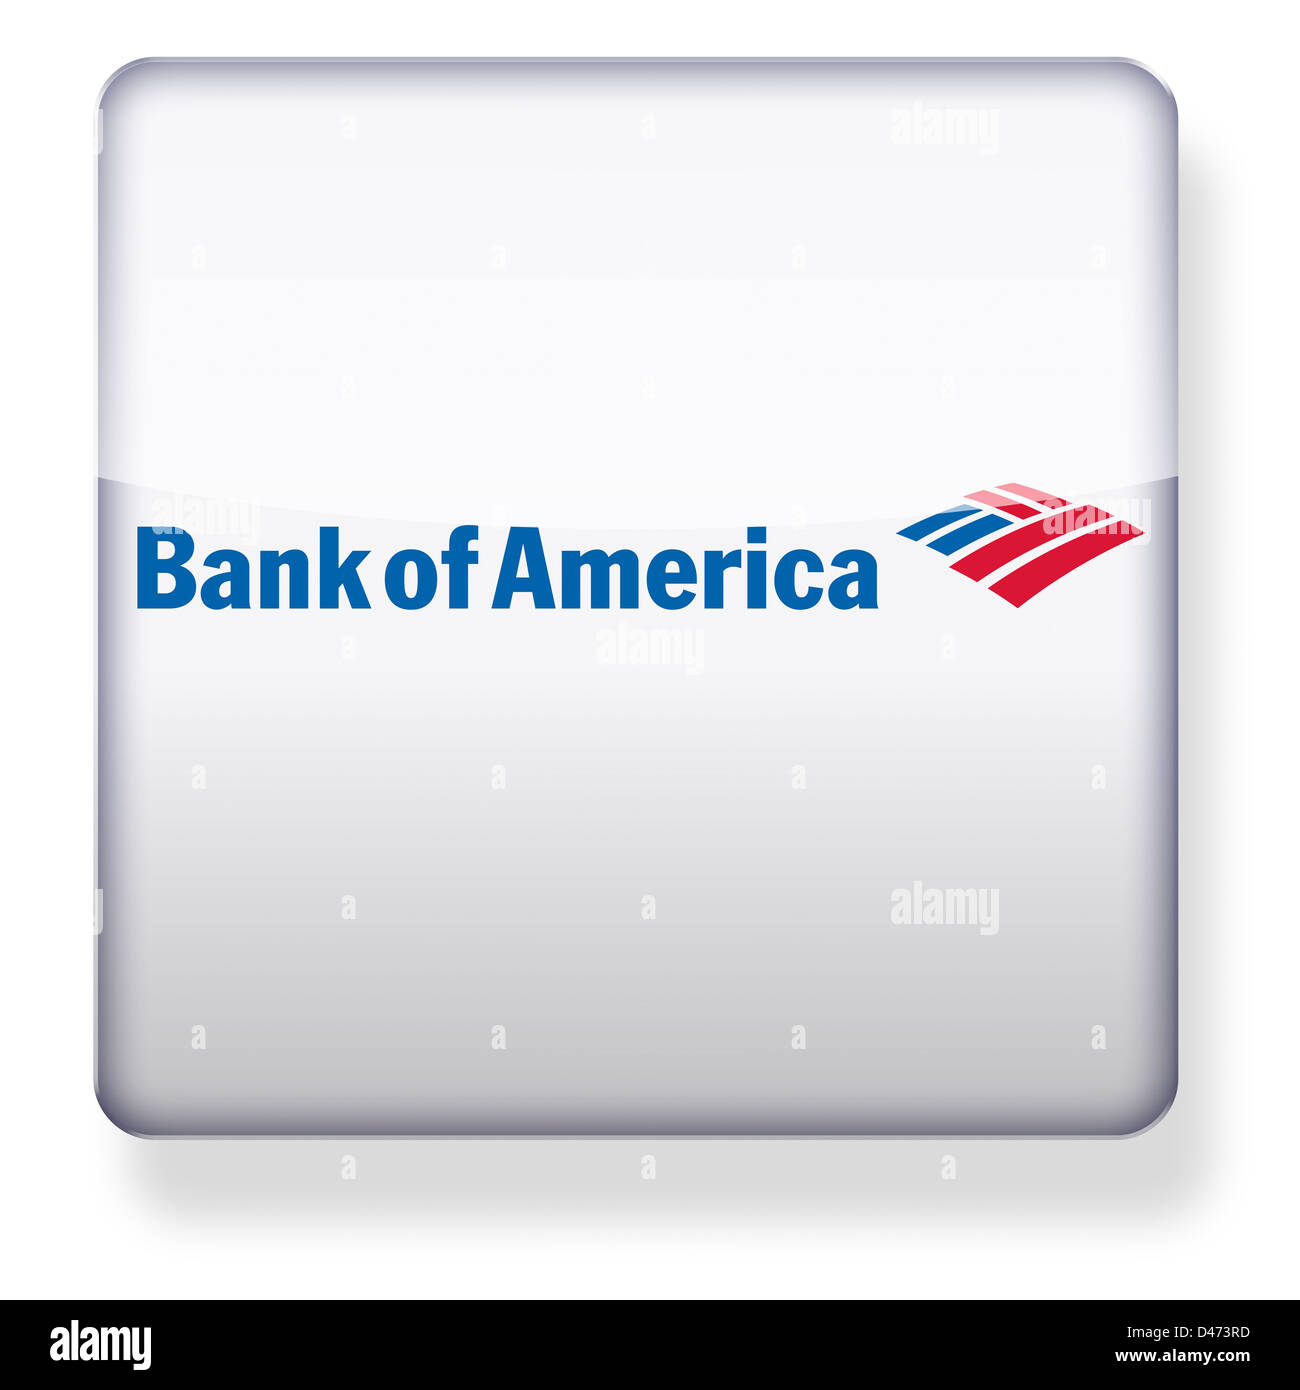 Bank of America logo as an app icon. Clipping path included. Stock Photo